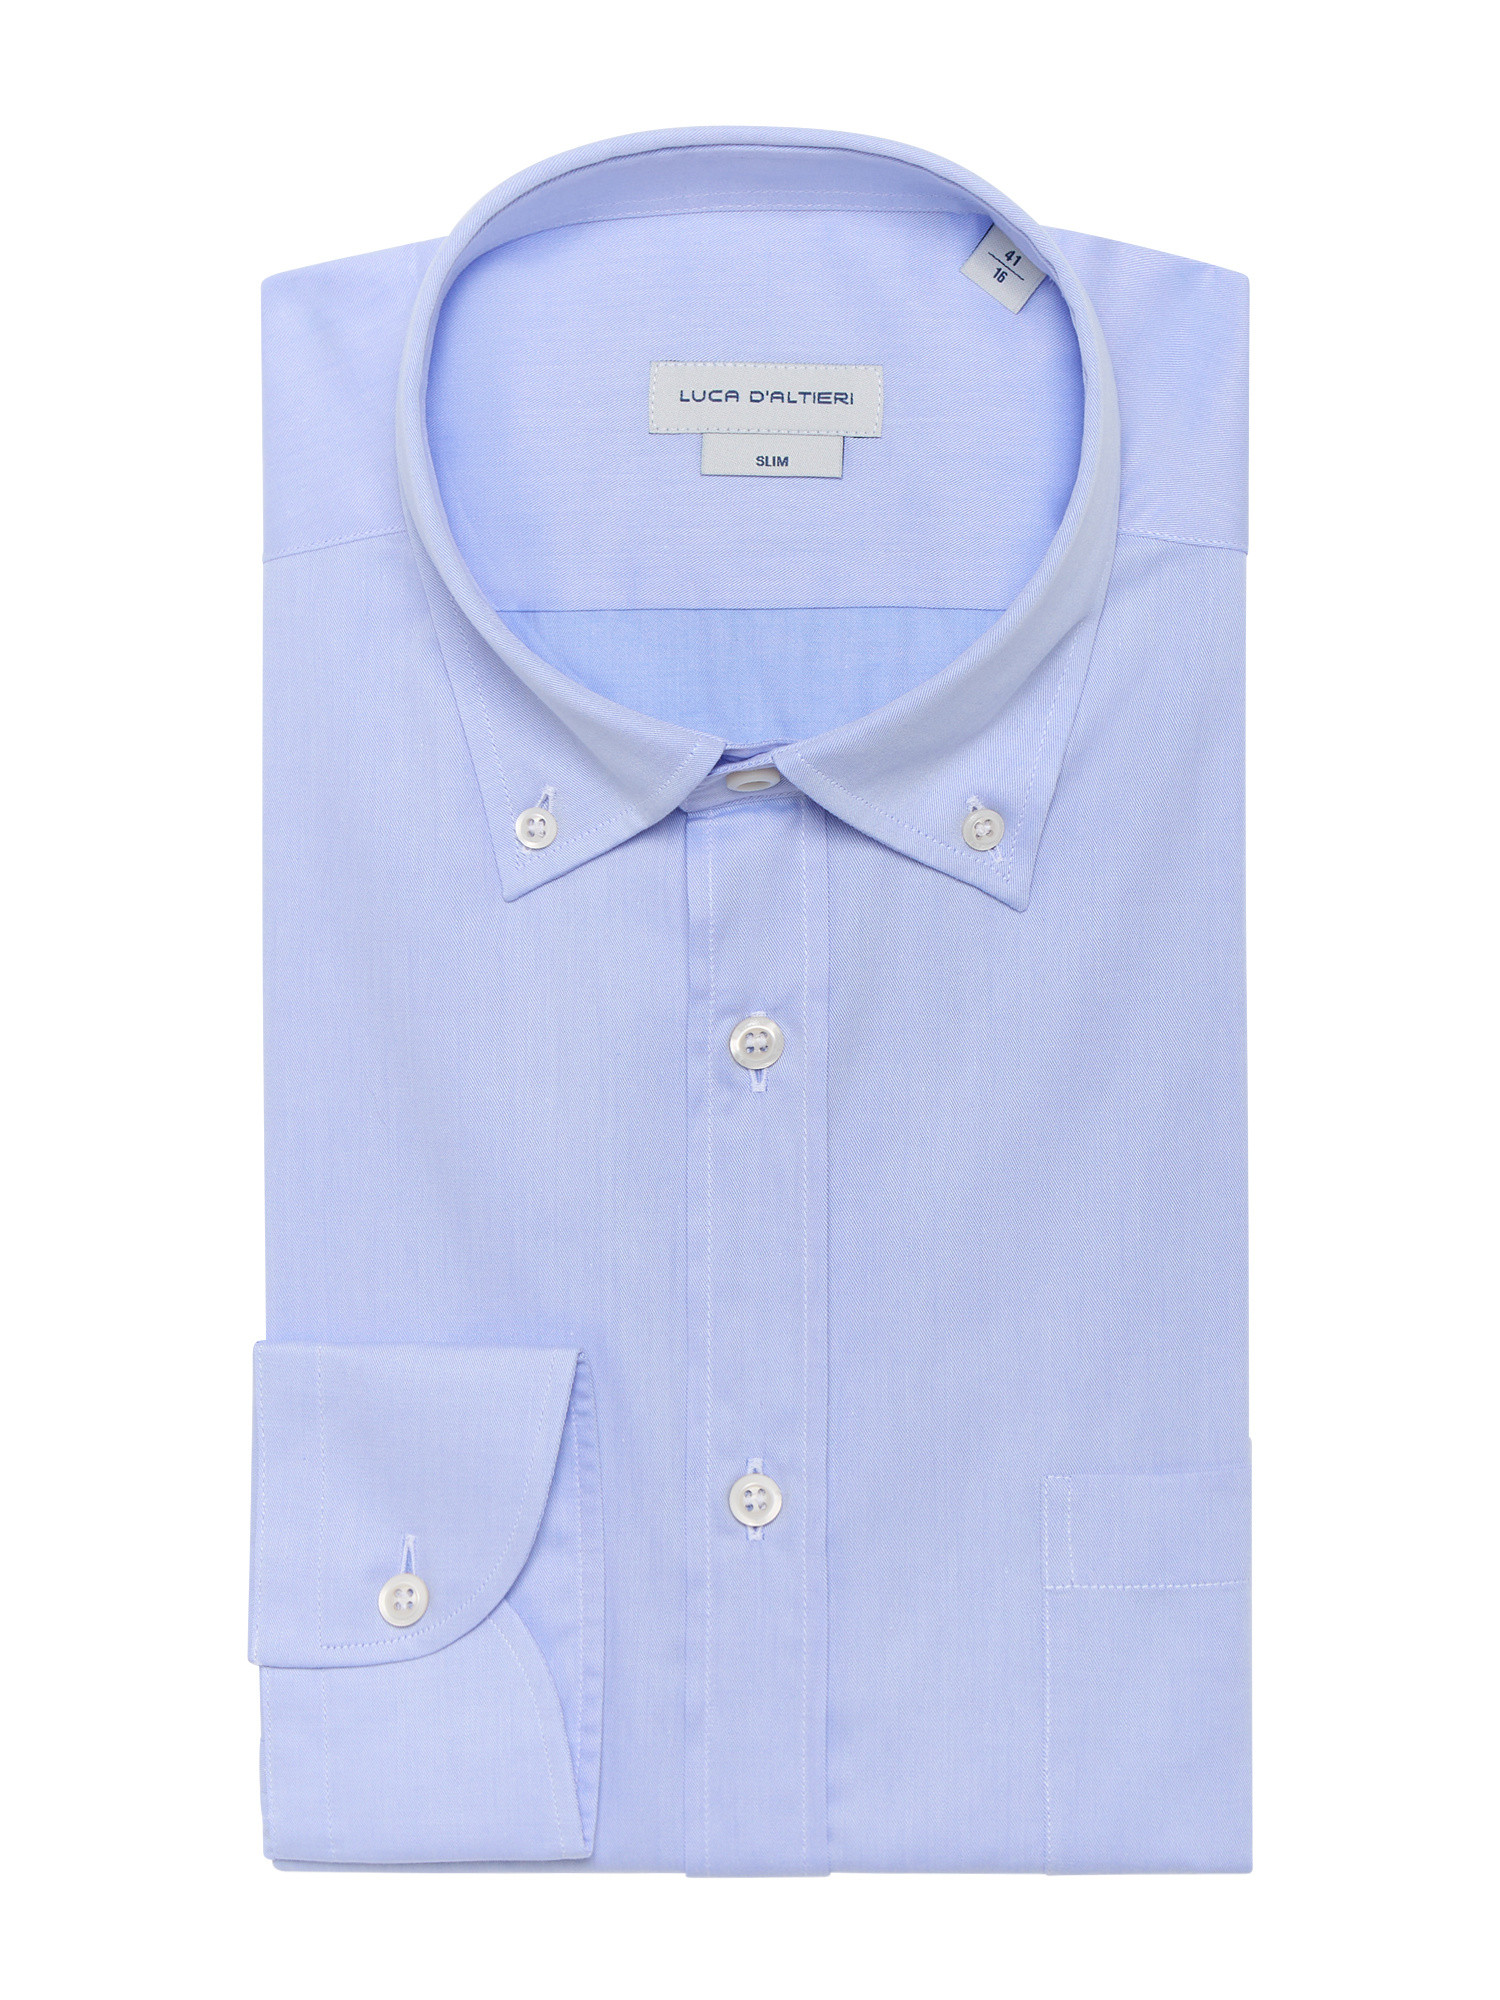 Luca D'Altieri - Casual slim fit shirt in pure cotton twill, Light Blue, large image number 0